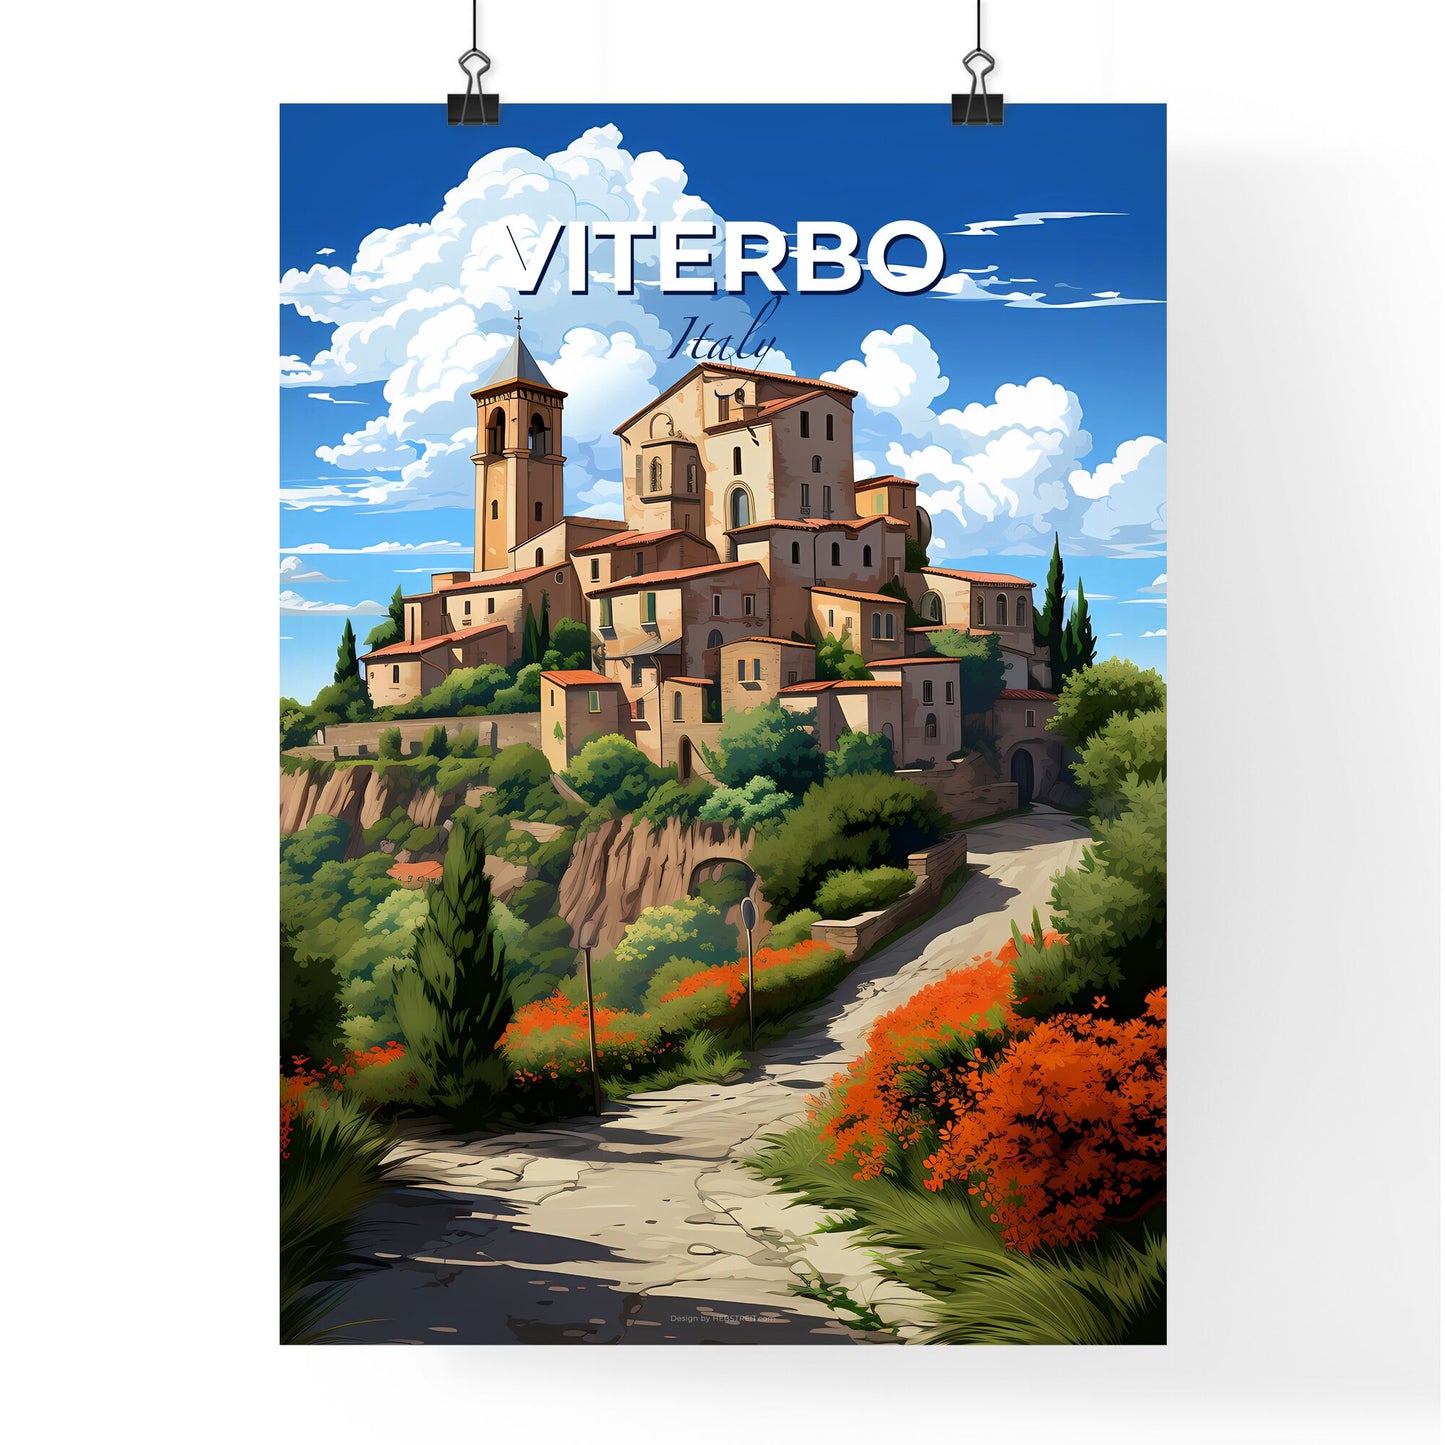 Viterbo, Italy, A Poster of a building on a hill Default Title